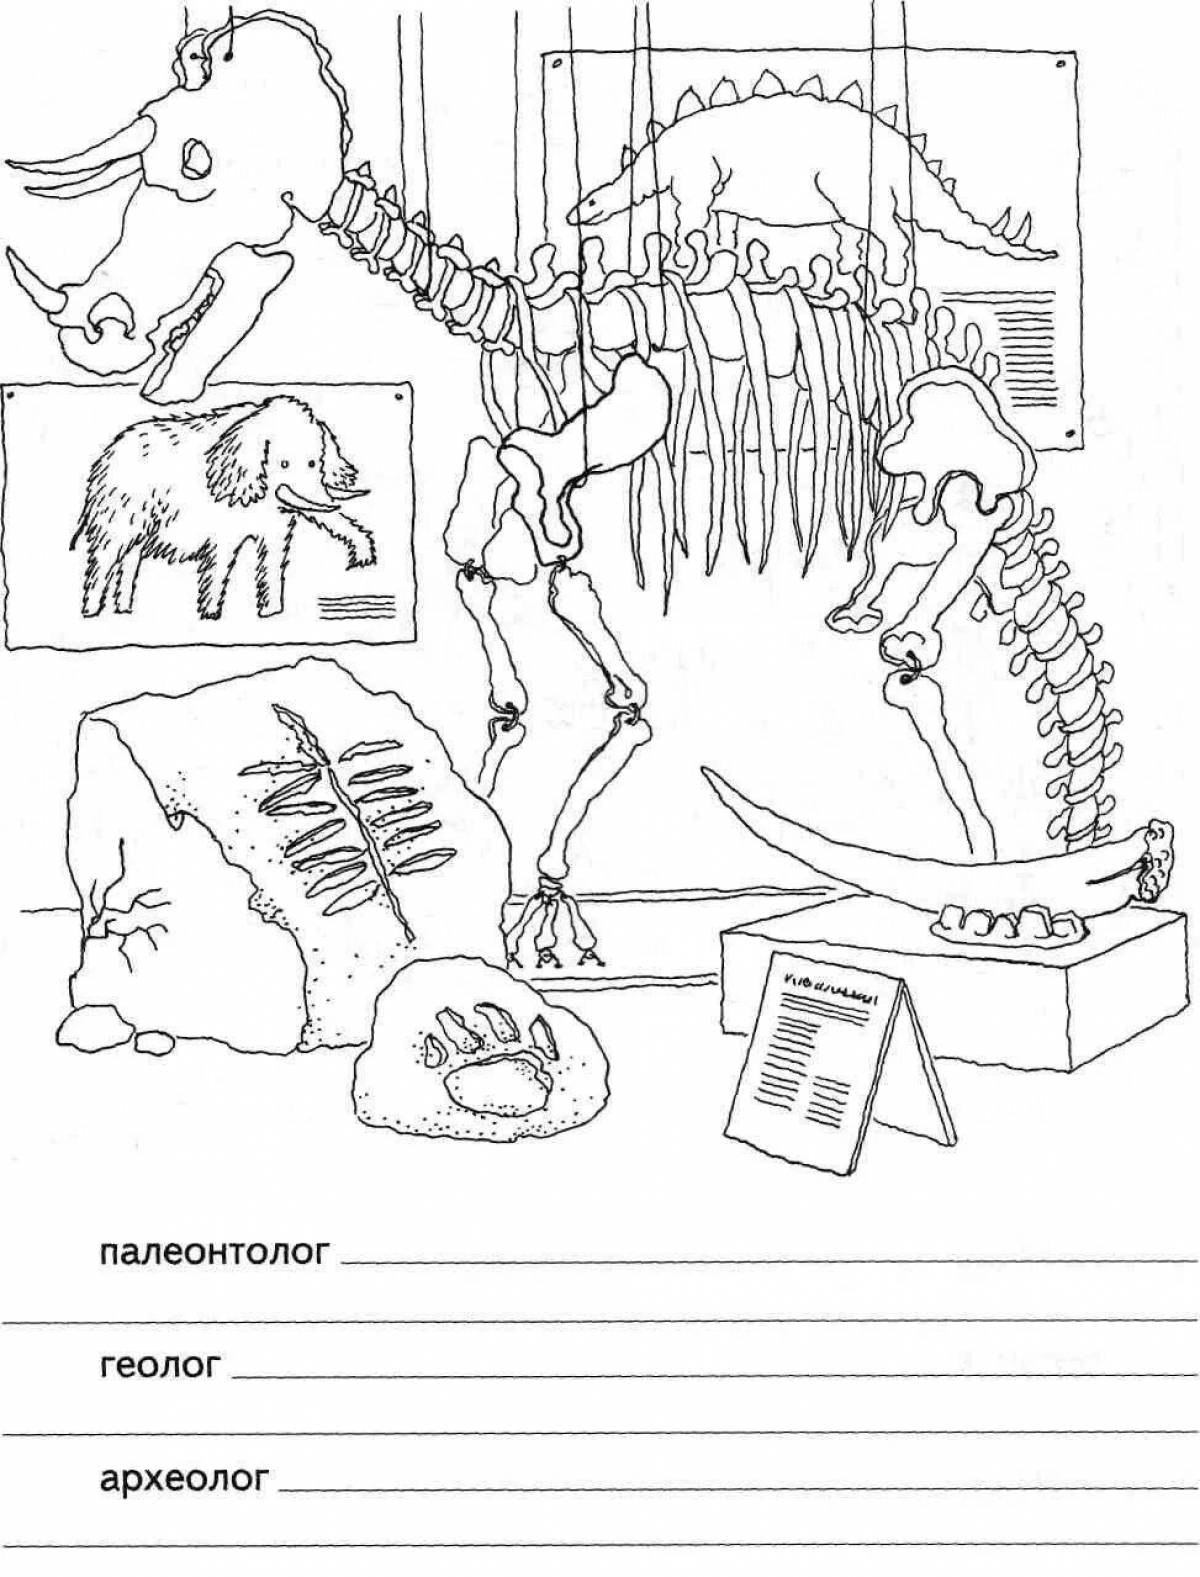 Coloring book playful archaeologist